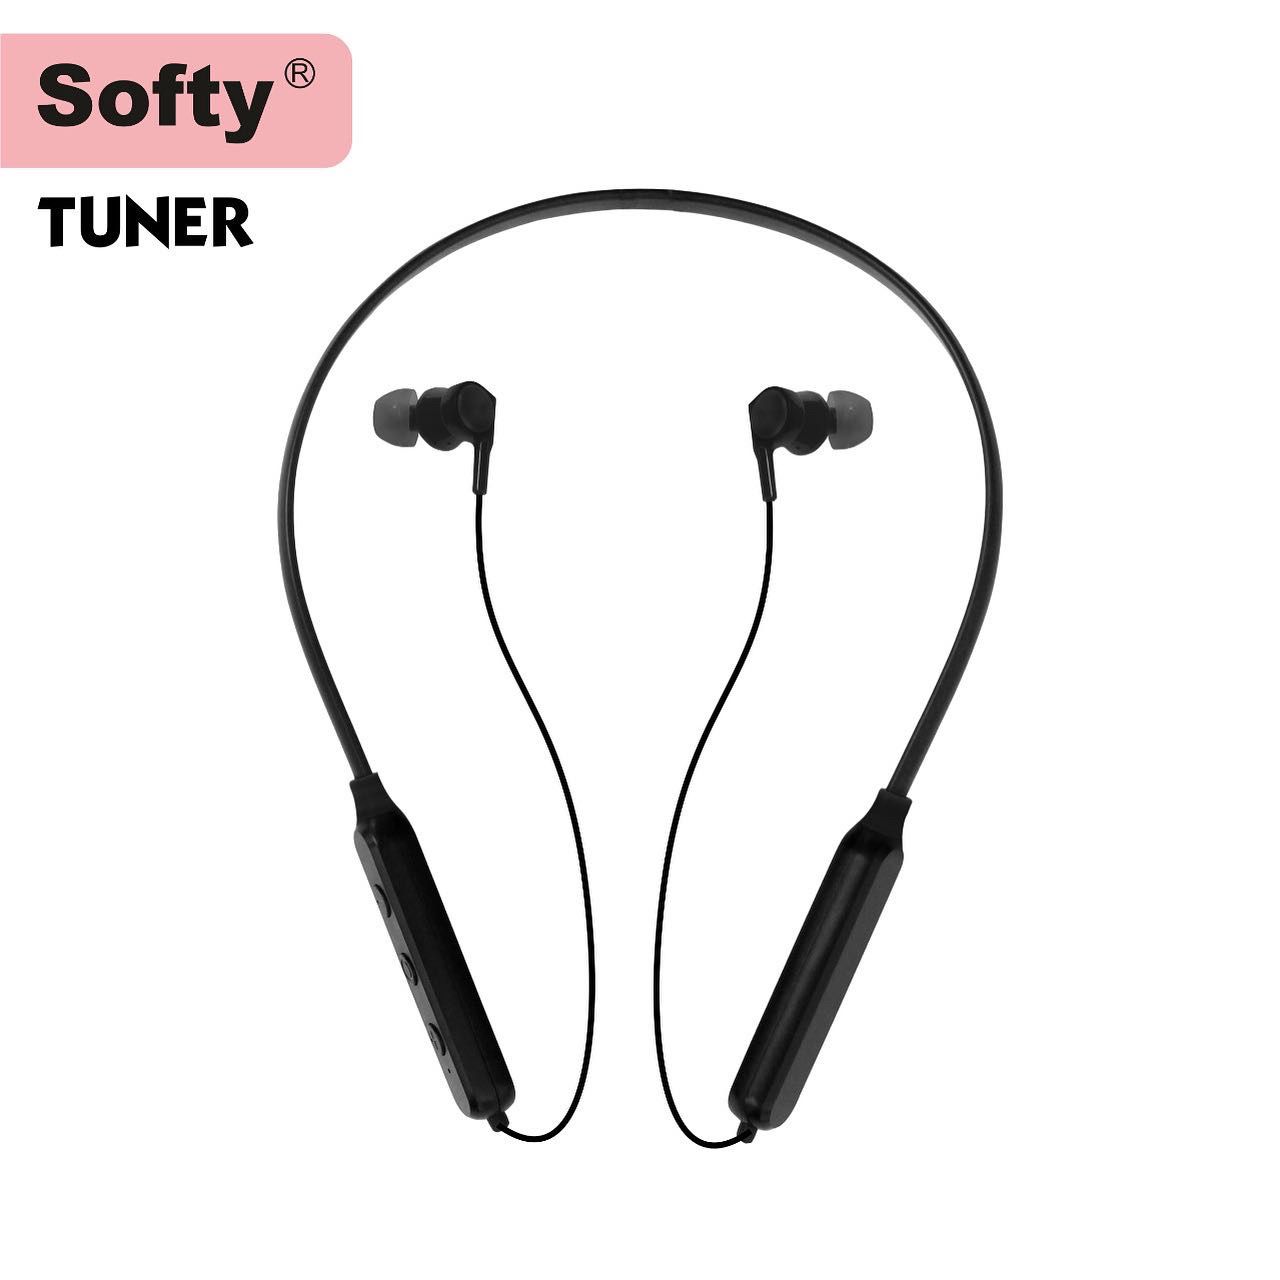 anti-fall material engineering protect hearing longer standby time Dilwe Wireless Bluetooth 4.2 anti-sweat headset Metal shell